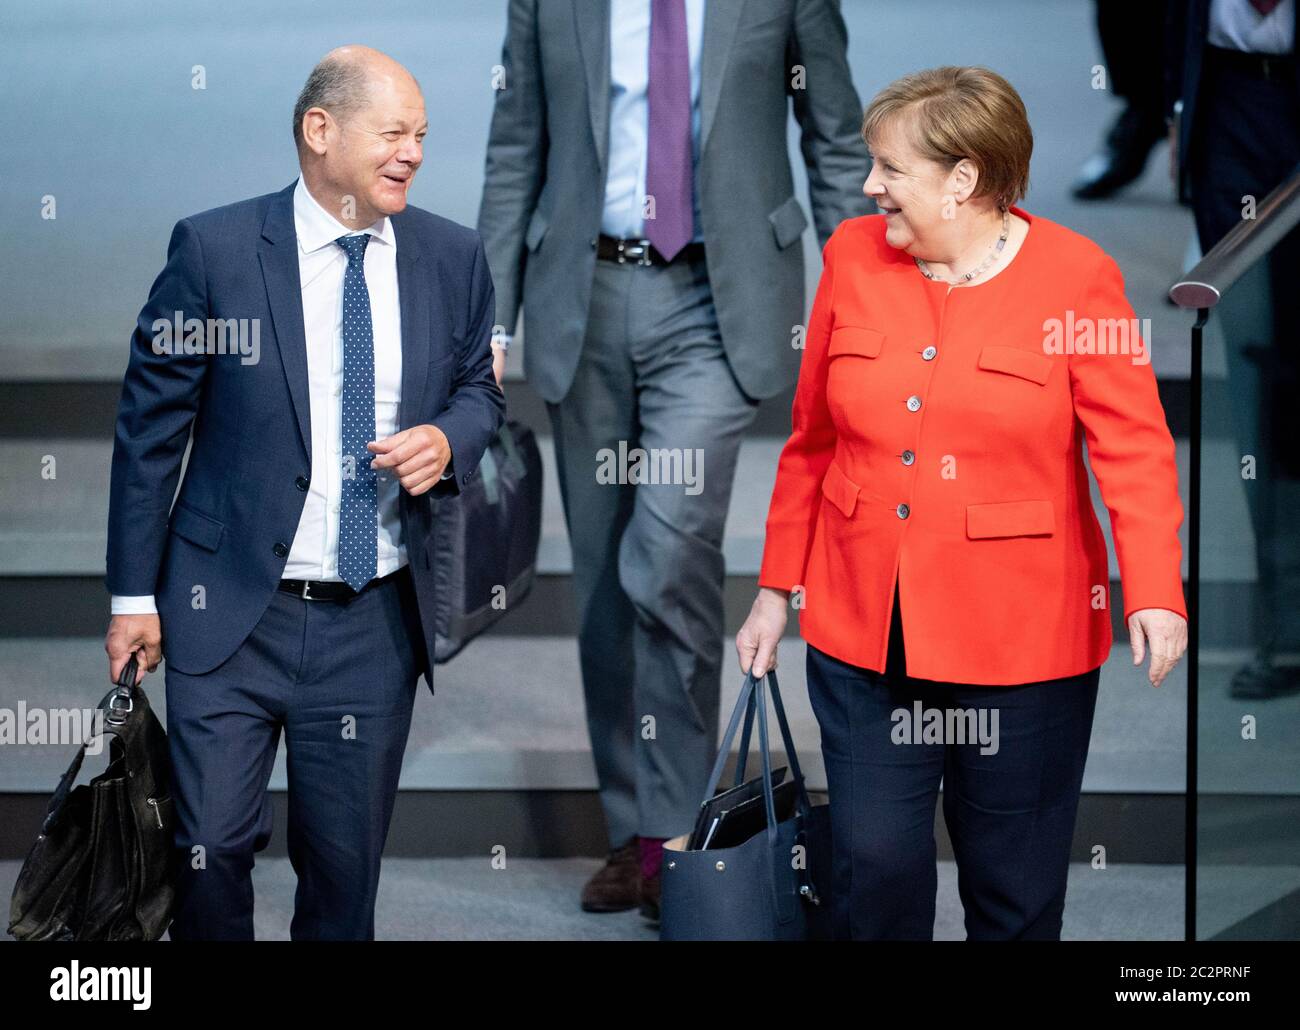 Berlin, Germany. 18th June, 2020. Chancellor Angela Merkel (CDU), and Olaf Scholz (SPD), Federal Minister of Finance, will attend the 166th session of the German Bundestag. Credit: Kay Nietfeld/dpa/Alamy Live News Stock Photo